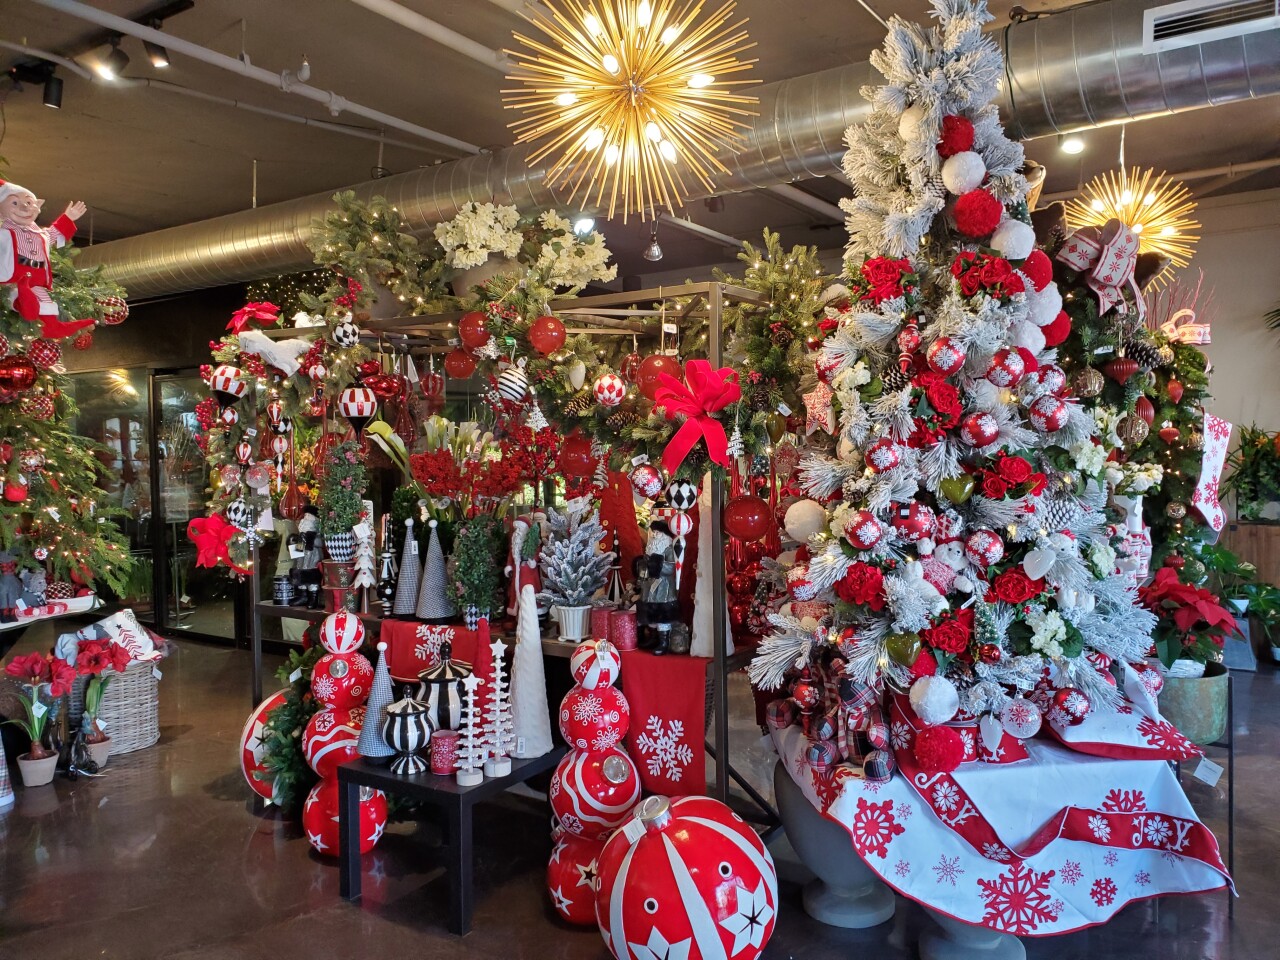 Adelaide's flower shop filled its front space at 919 Silverado St. with holiday decor.